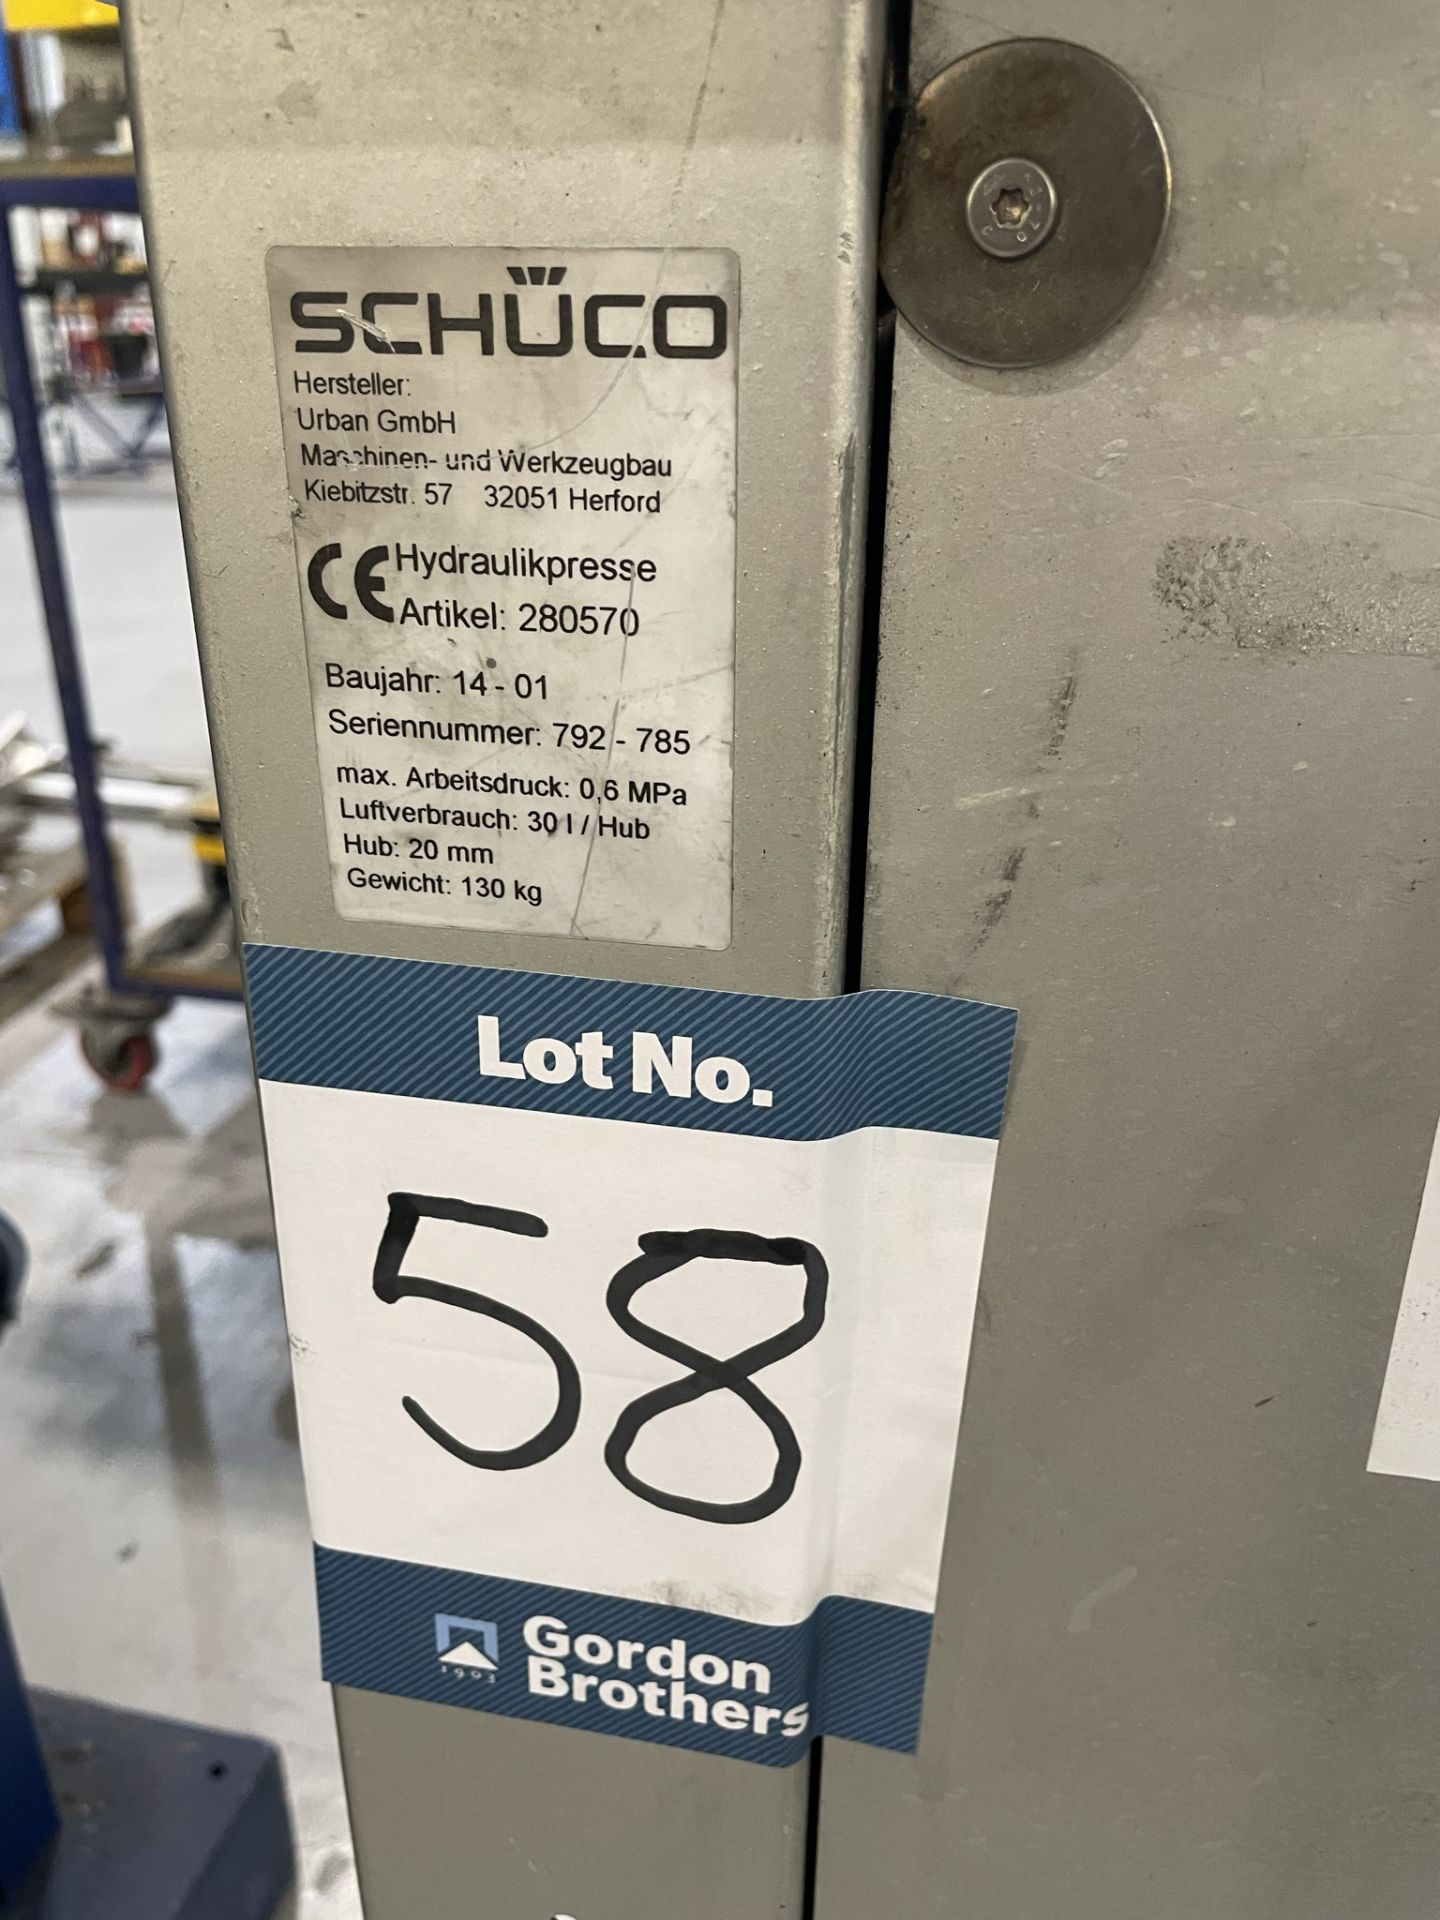 Schuco, 280570 pneumatic press, Serial No. 792-785 (DOM: 2014) (in need of repair) - Image 3 of 3